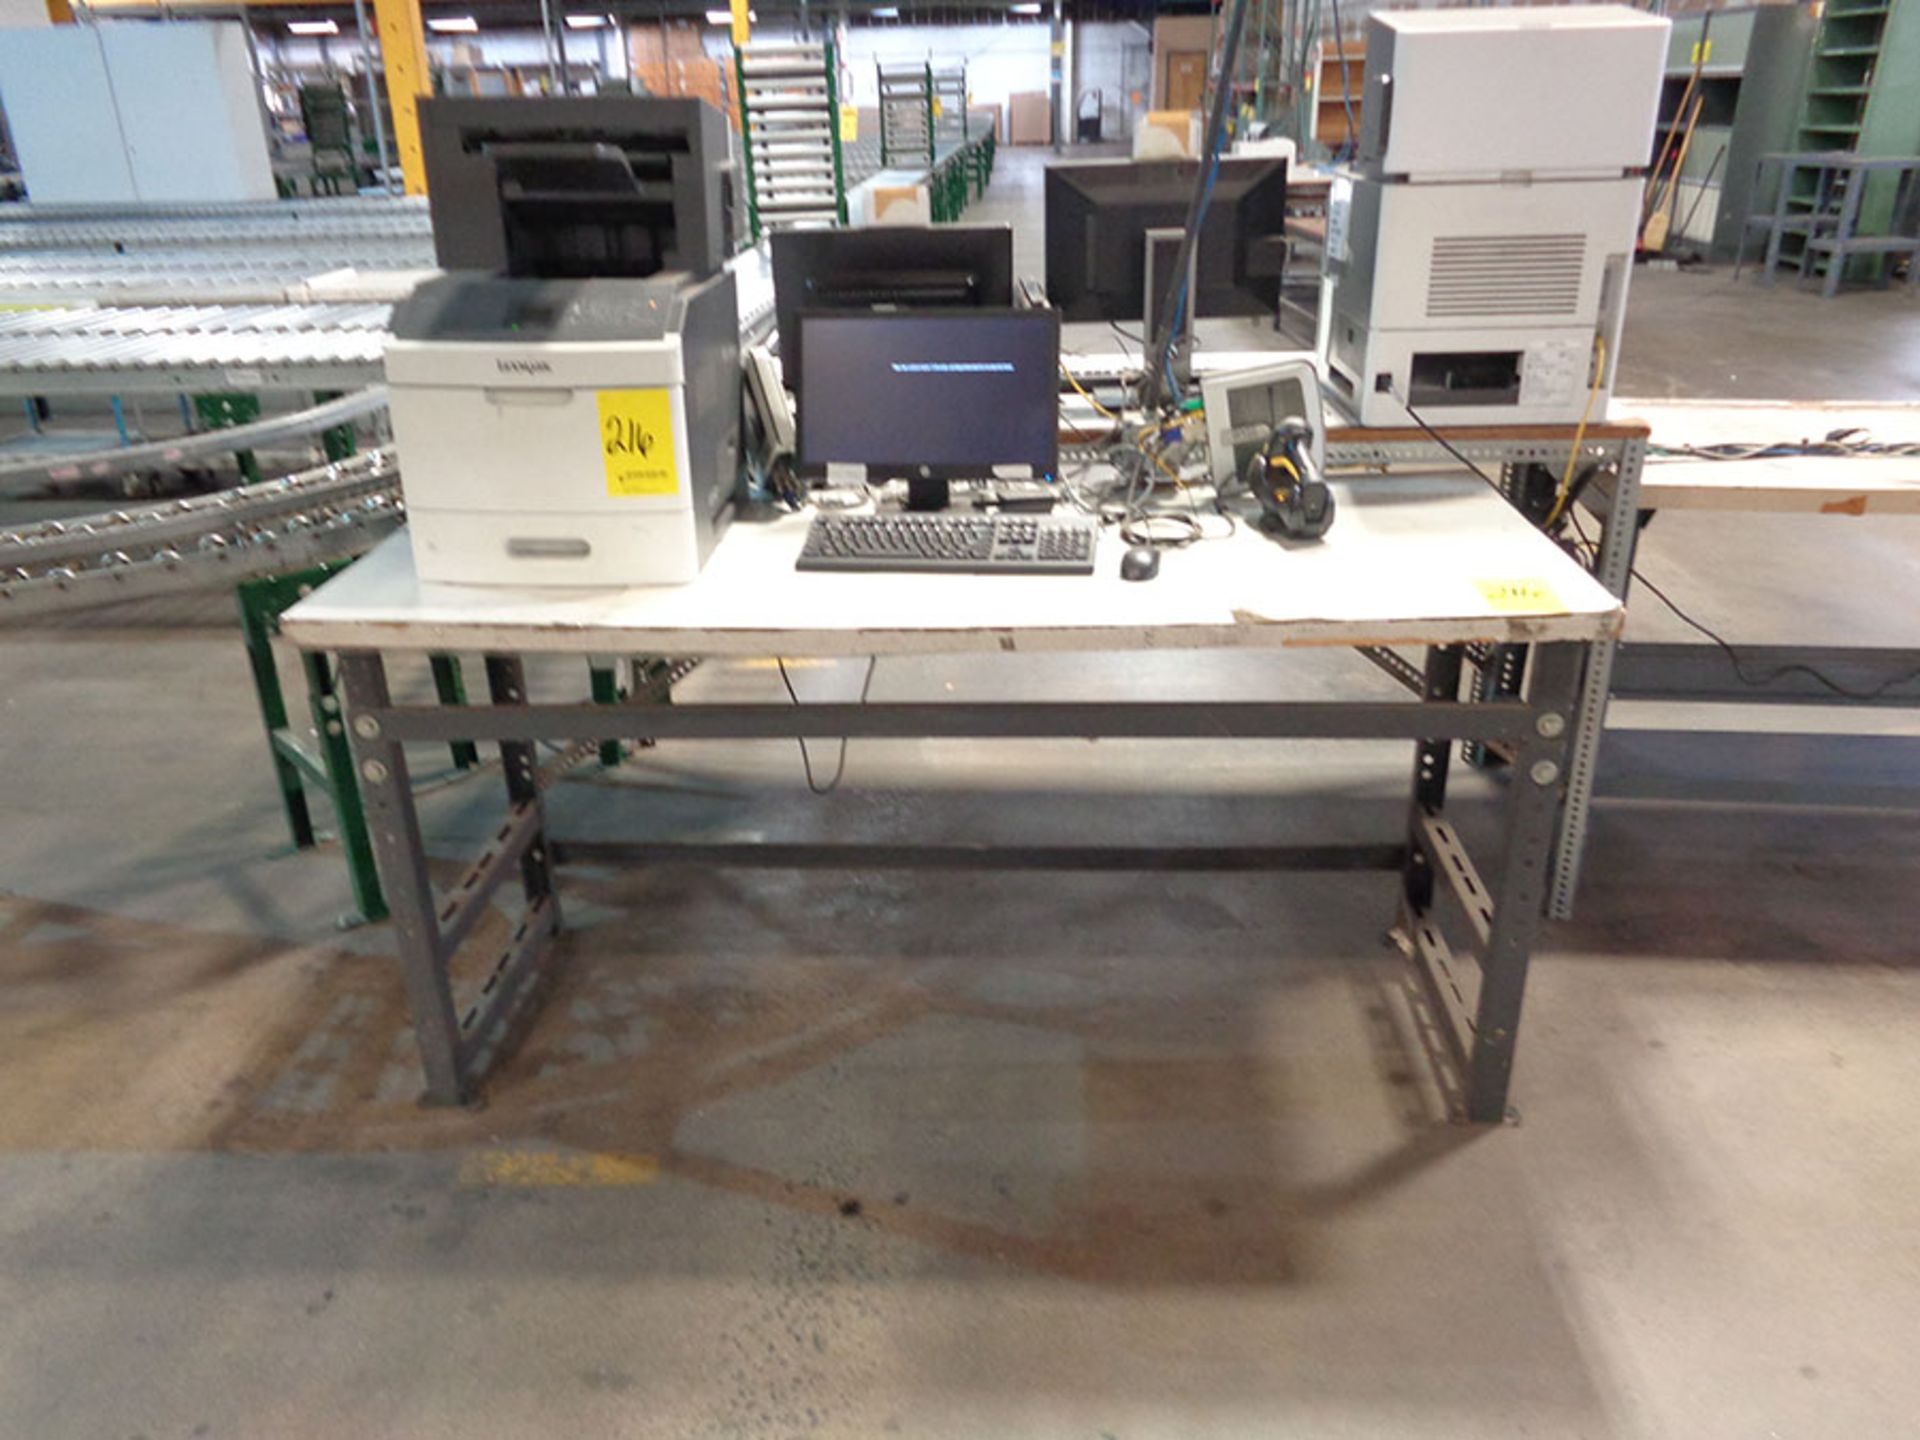 (3) WORKBENCHES, (2) LEXMARK PRINTERS, MONITORS, AND KEYBOARDS